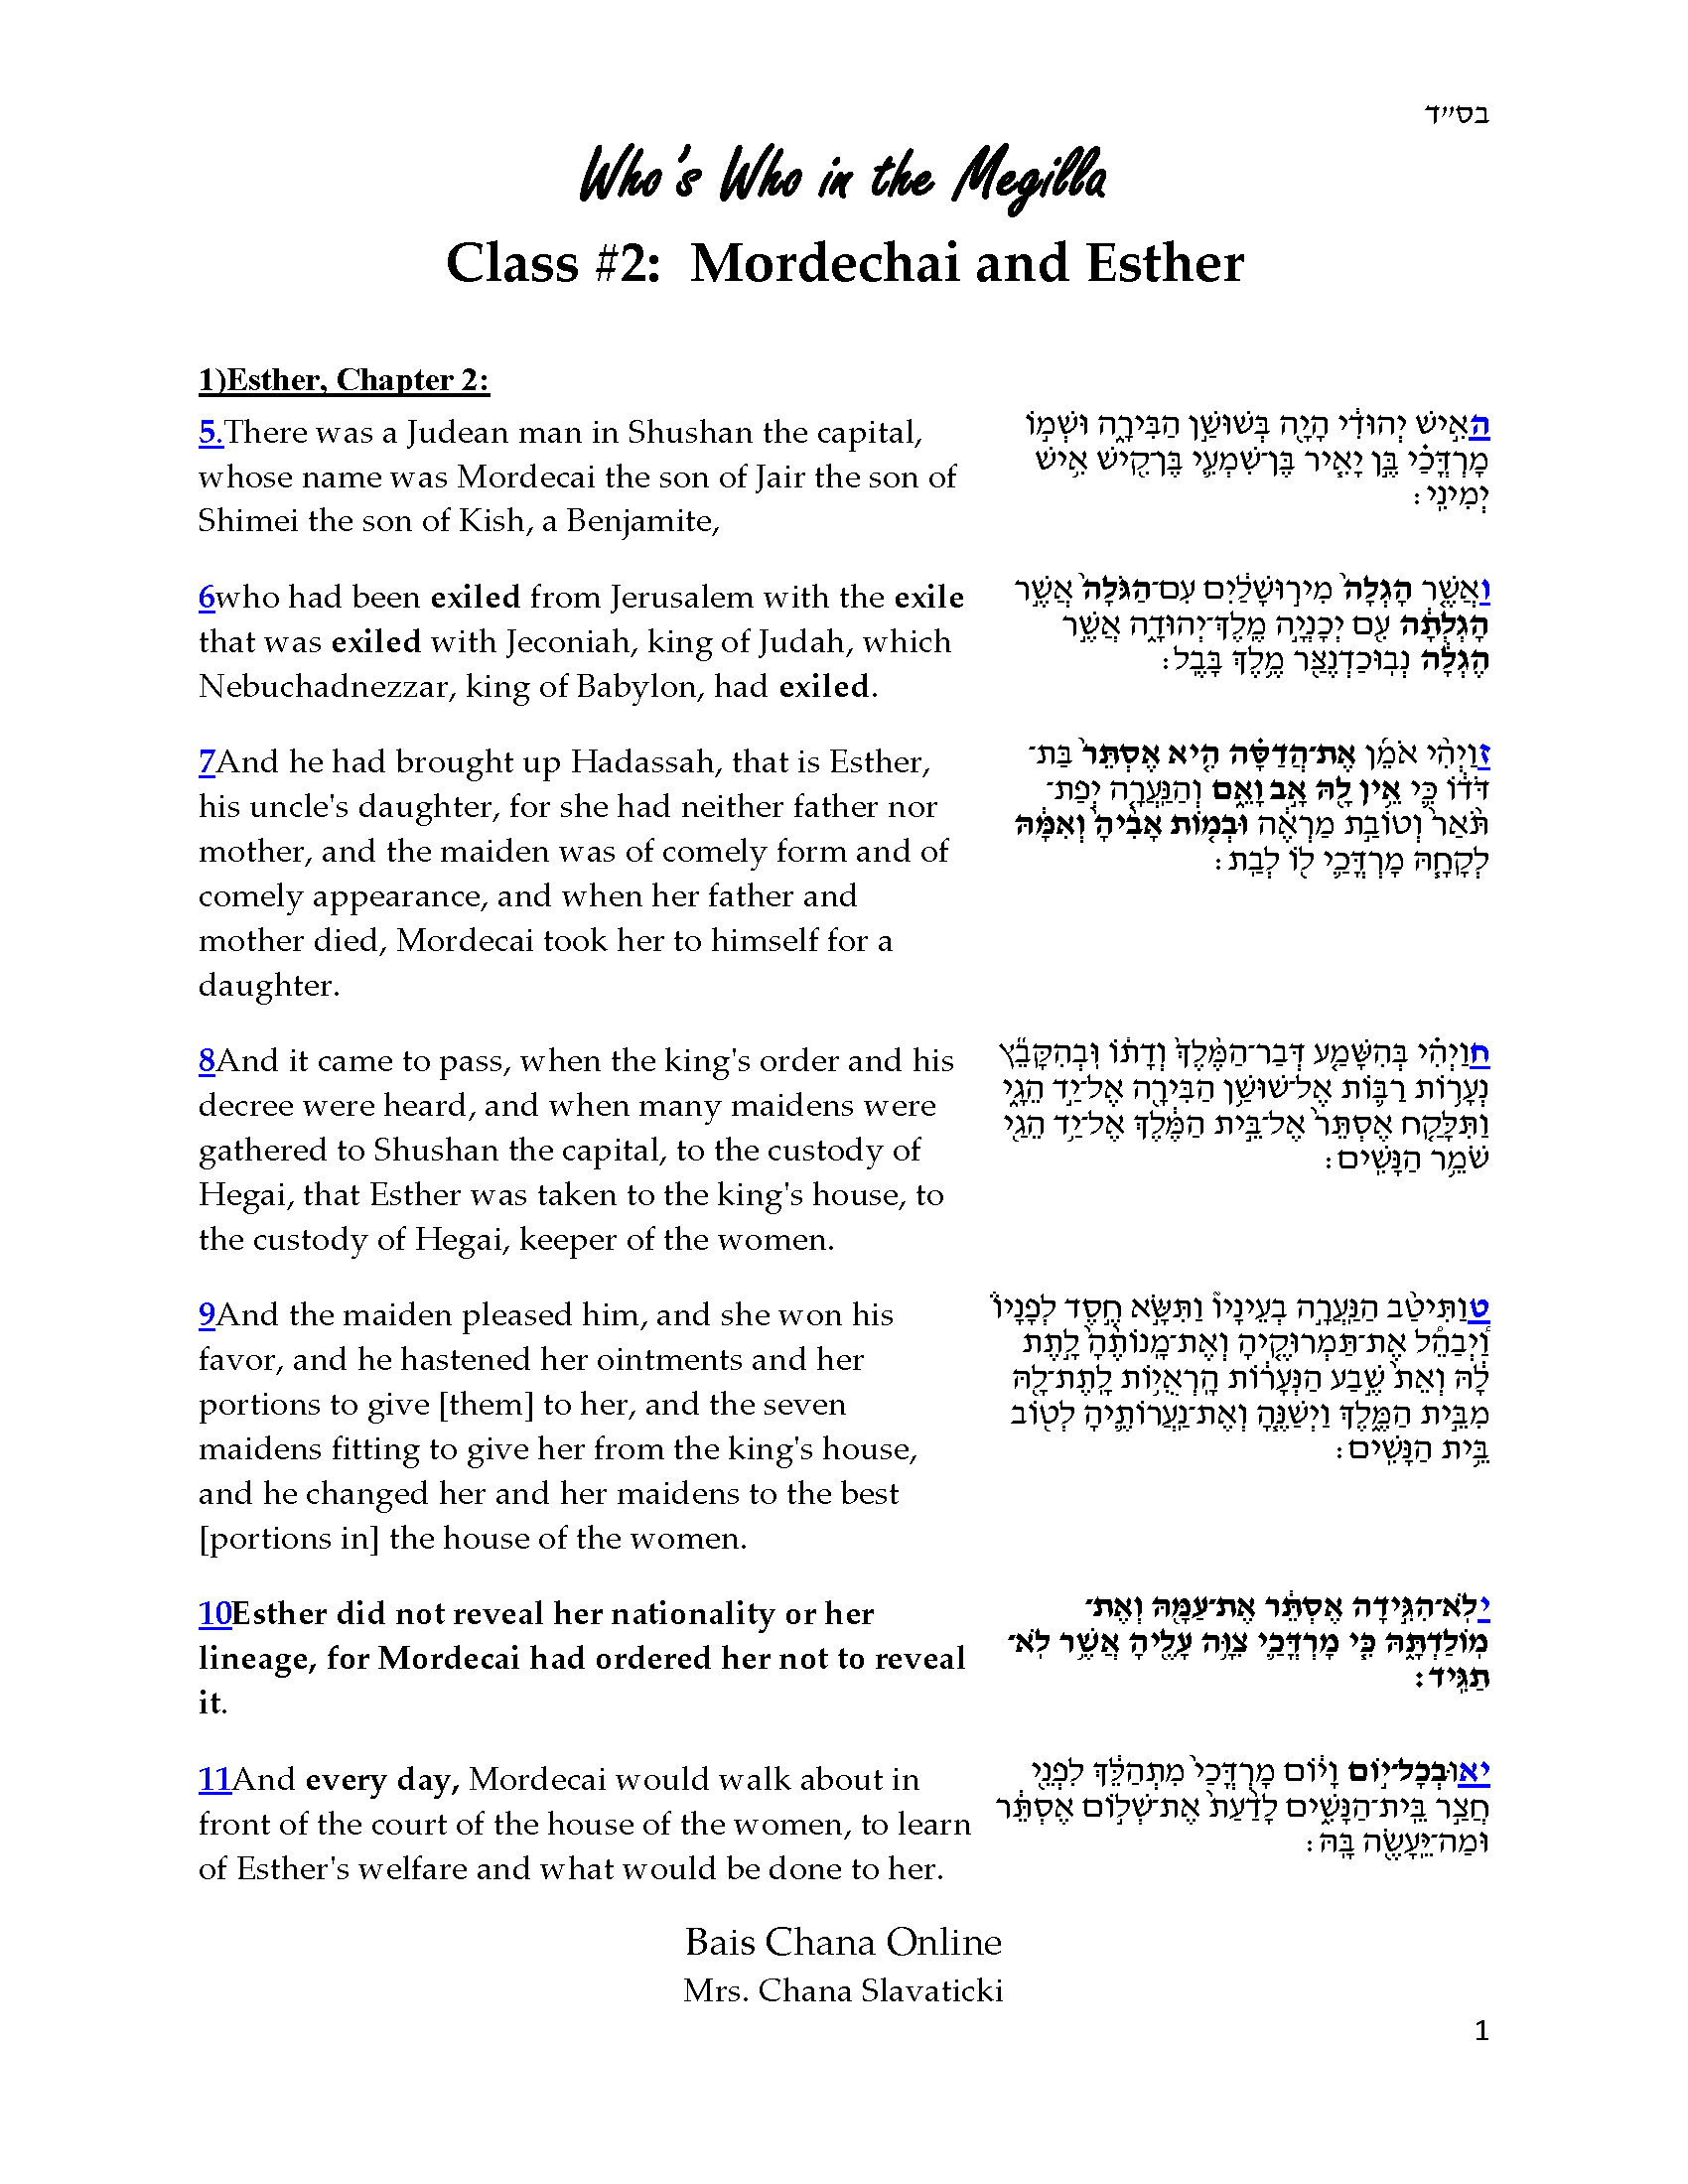 Who's Who in the Purim Story Class #2_Page_1